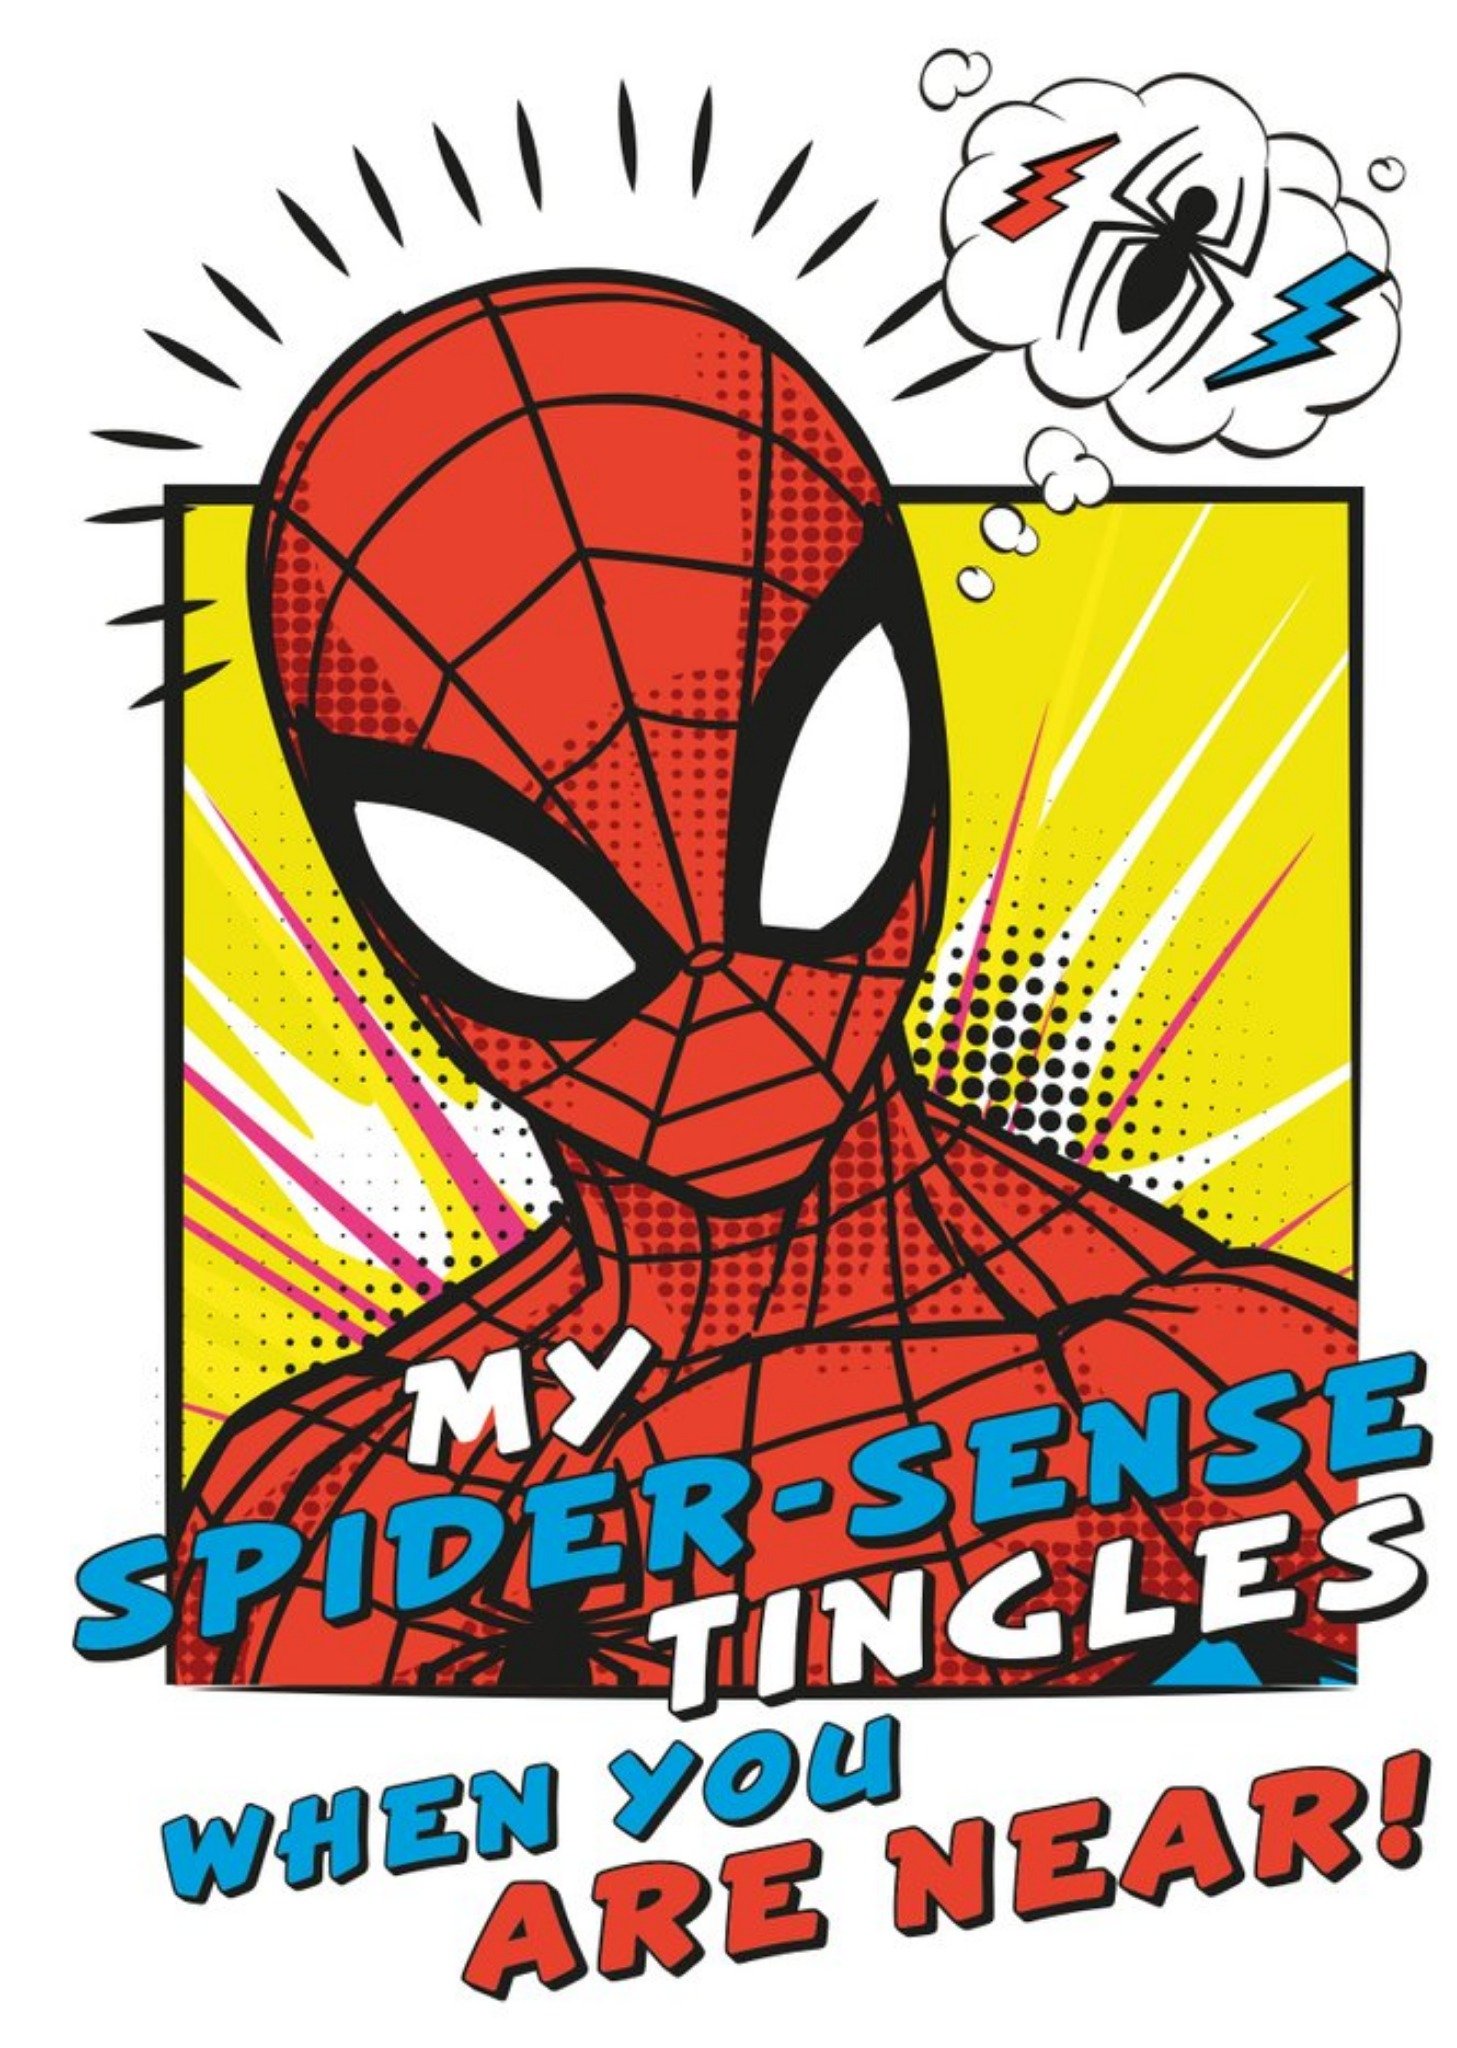 Marvel Comics Spider-Man Senses Tingles When Your Near Valentine's Day Card, Large